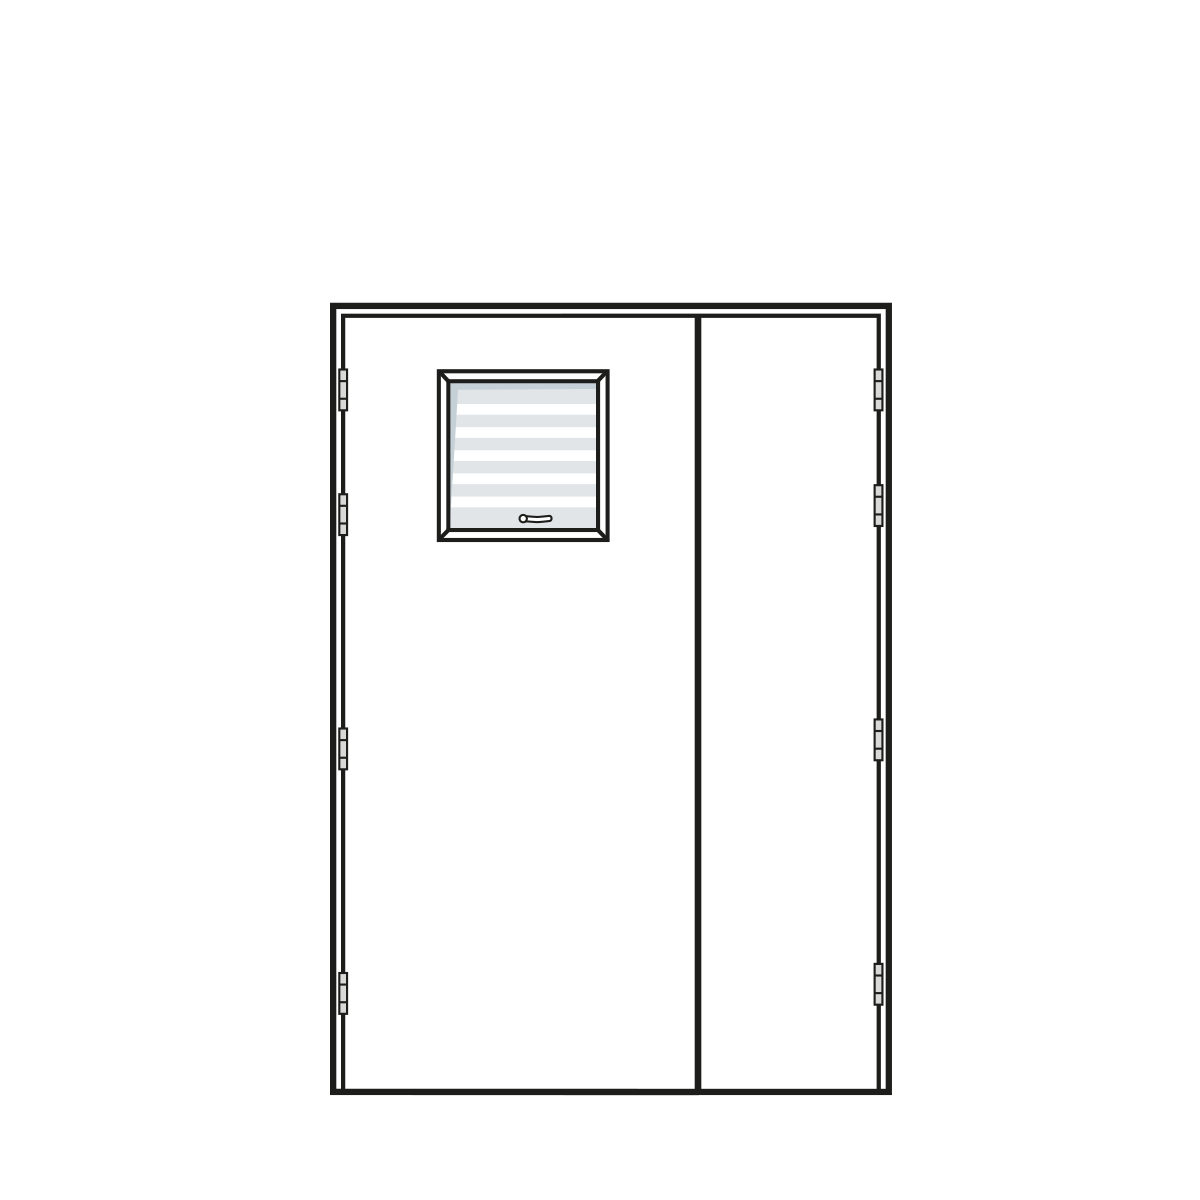 Door Configuration - Unequal Pair Doorset with Privacy Vision Panel - Code UP-PV